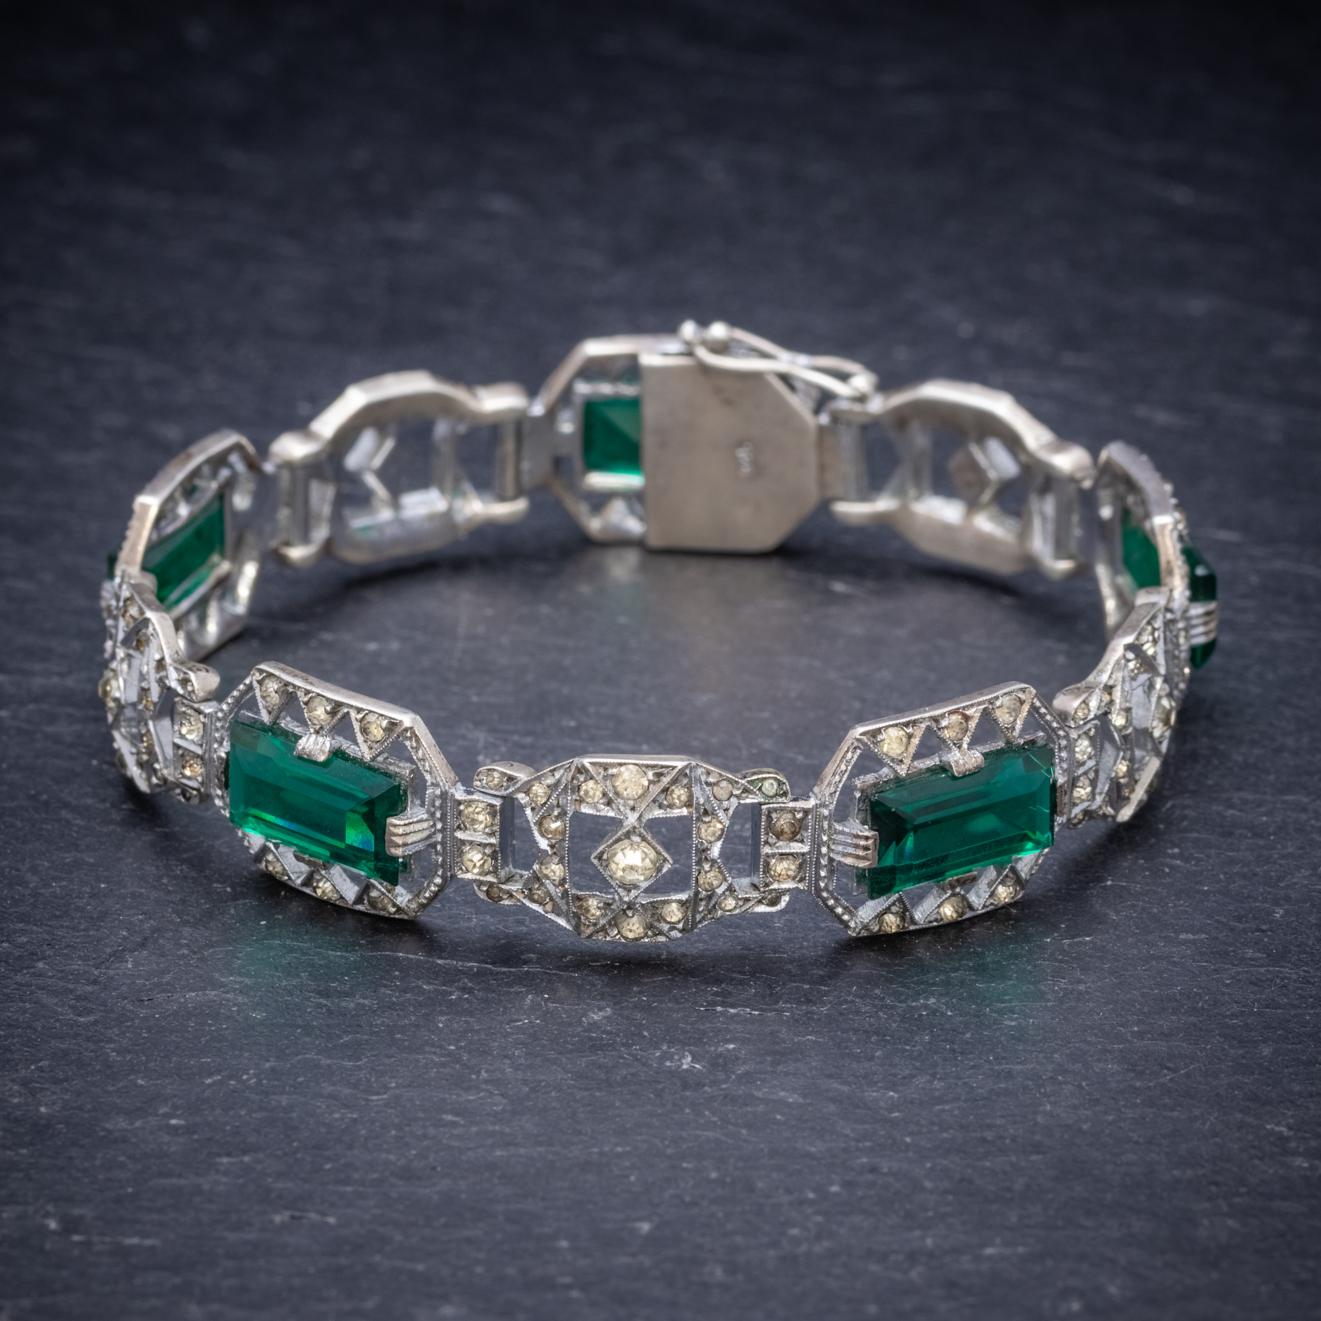 This fabulous Art Deco bracelet is decorated with sparkling white Paste Stones and larger emerald cut Pastes that have the deep green allure of Emeralds. 

The piece is all set in Sterling Silver and fitted with a secure box clasp and safety catch.